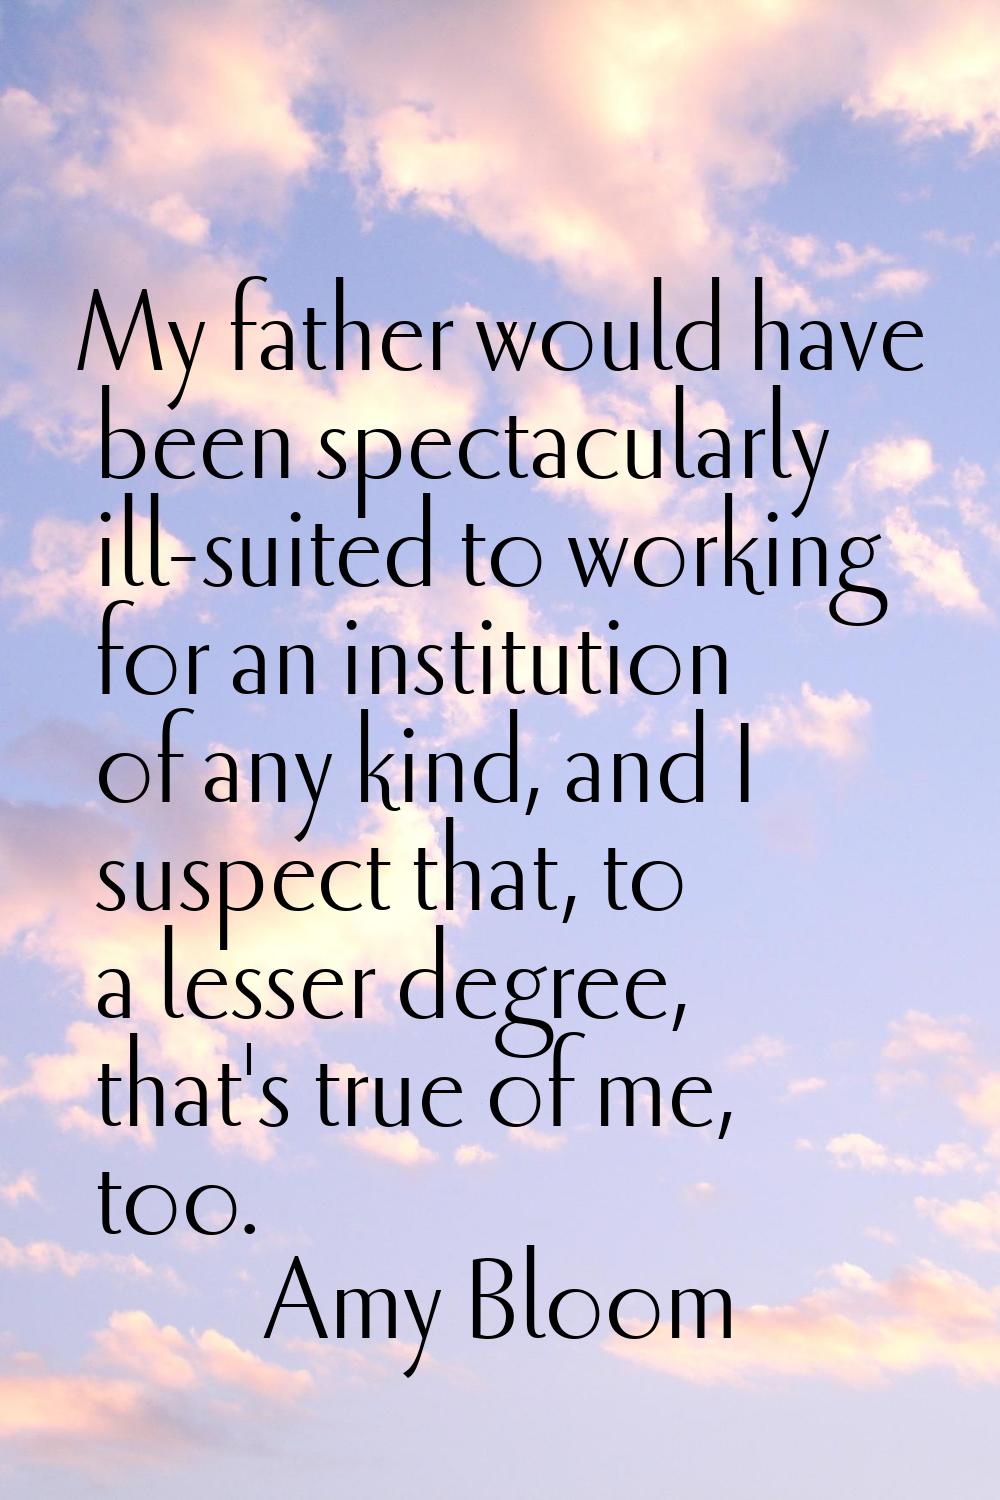 My father would have been spectacularly ill-suited to working for an institution of any kind, and I